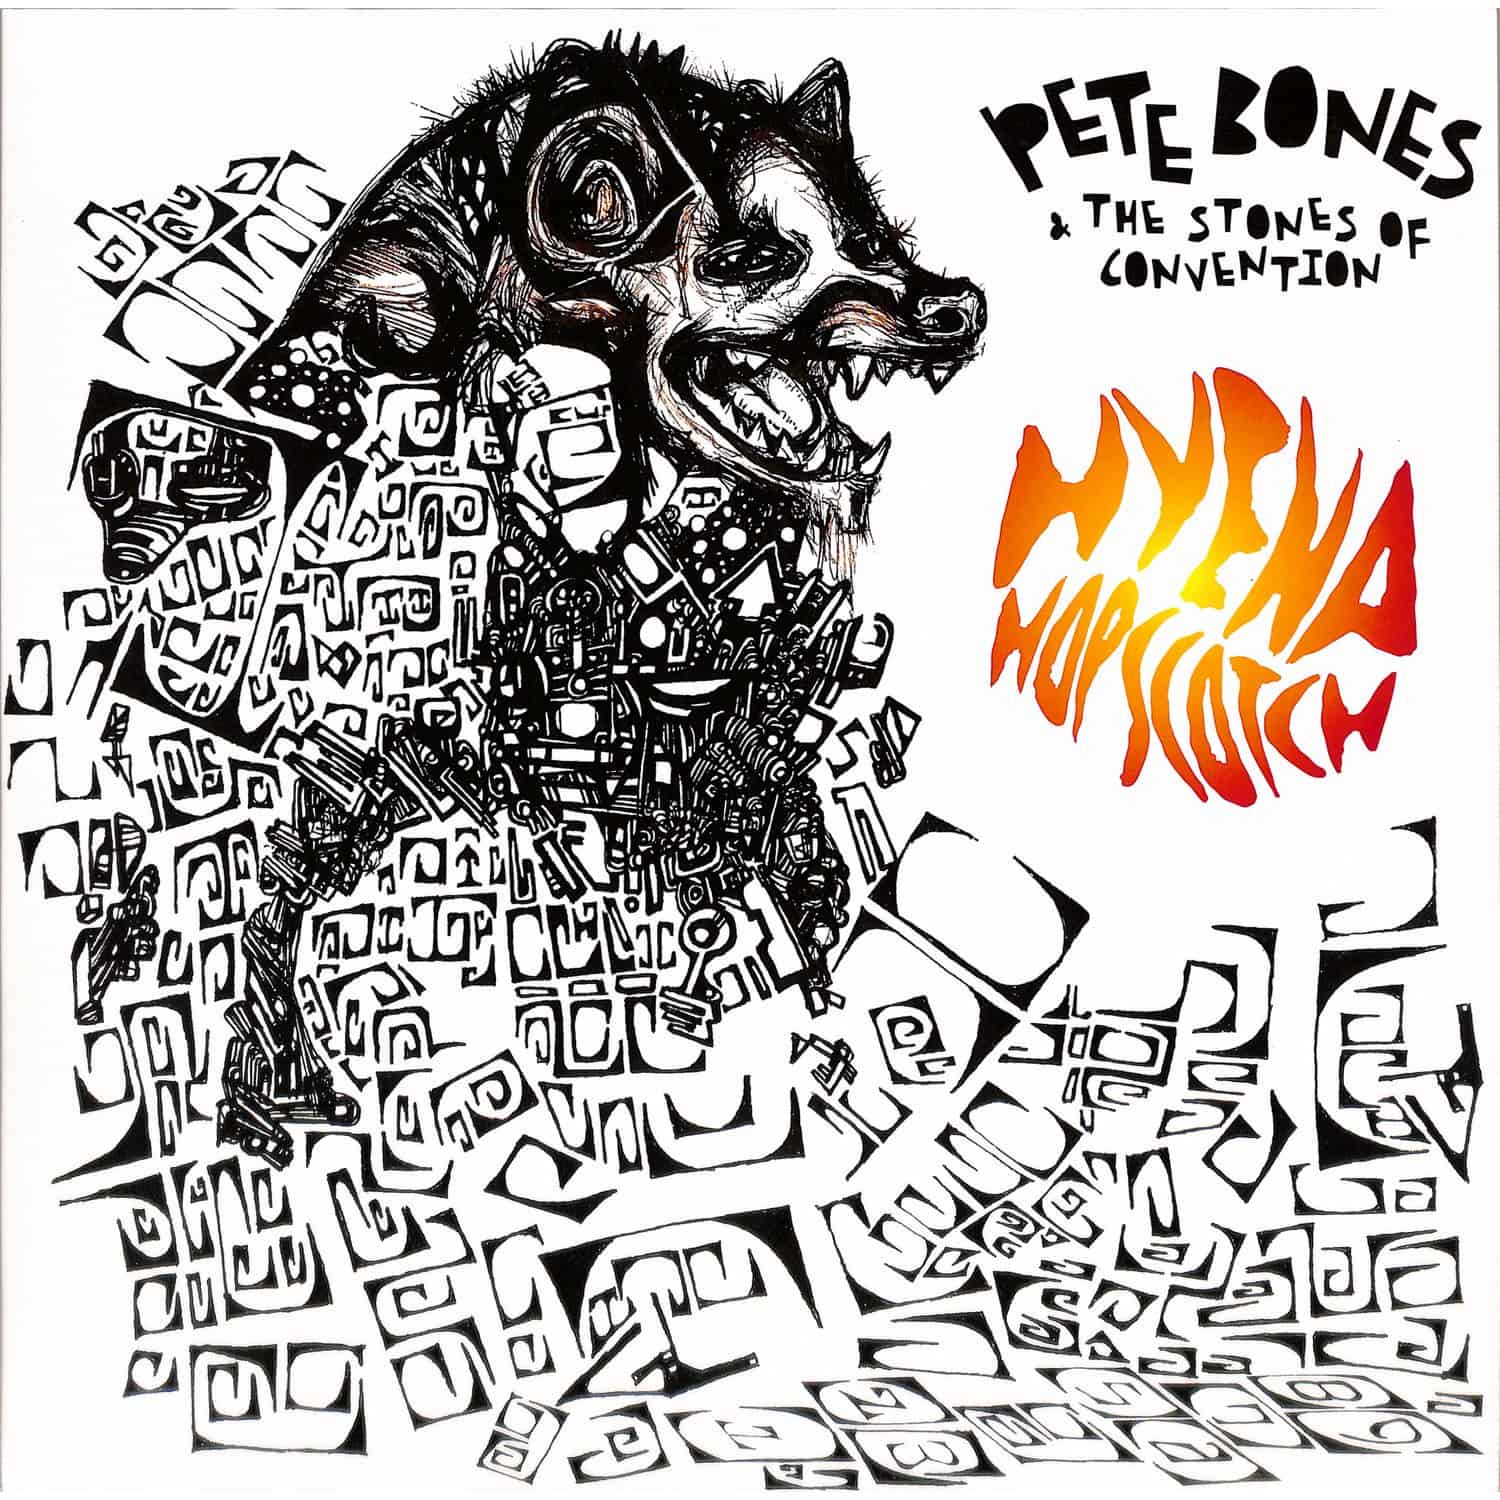 Pete Bones And The Stones Of Convention - HYENA HOPSCOTCH 